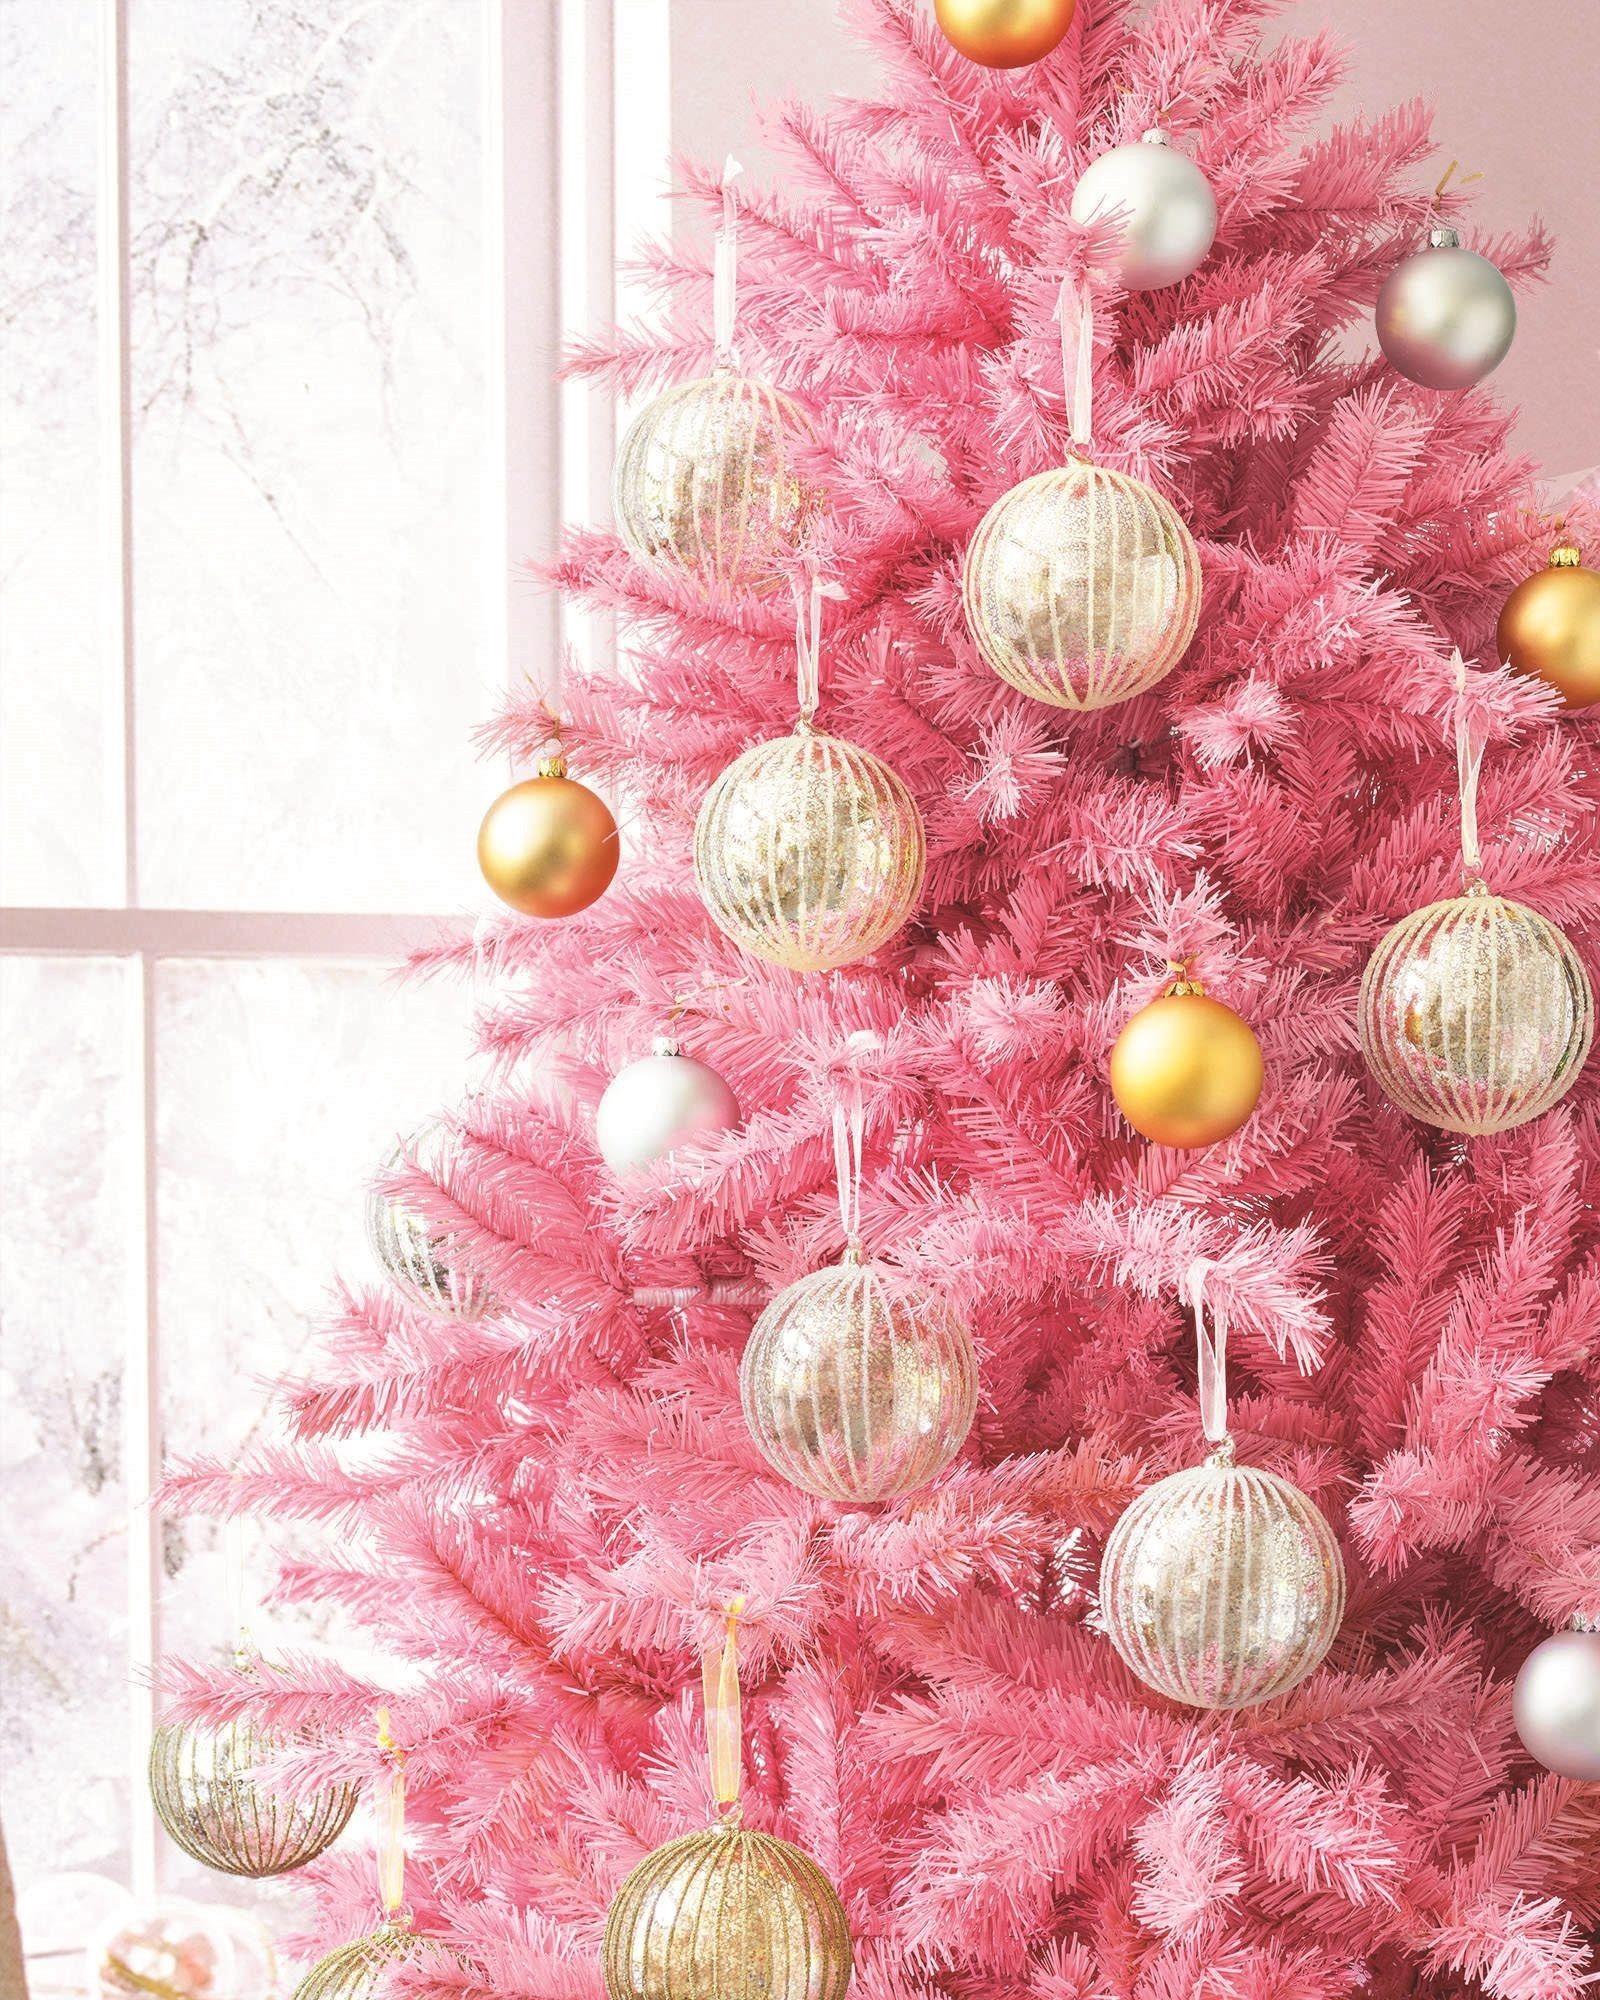 850484 Pink Christmas Background Images Stock Photos  Vectors   Shutterstock